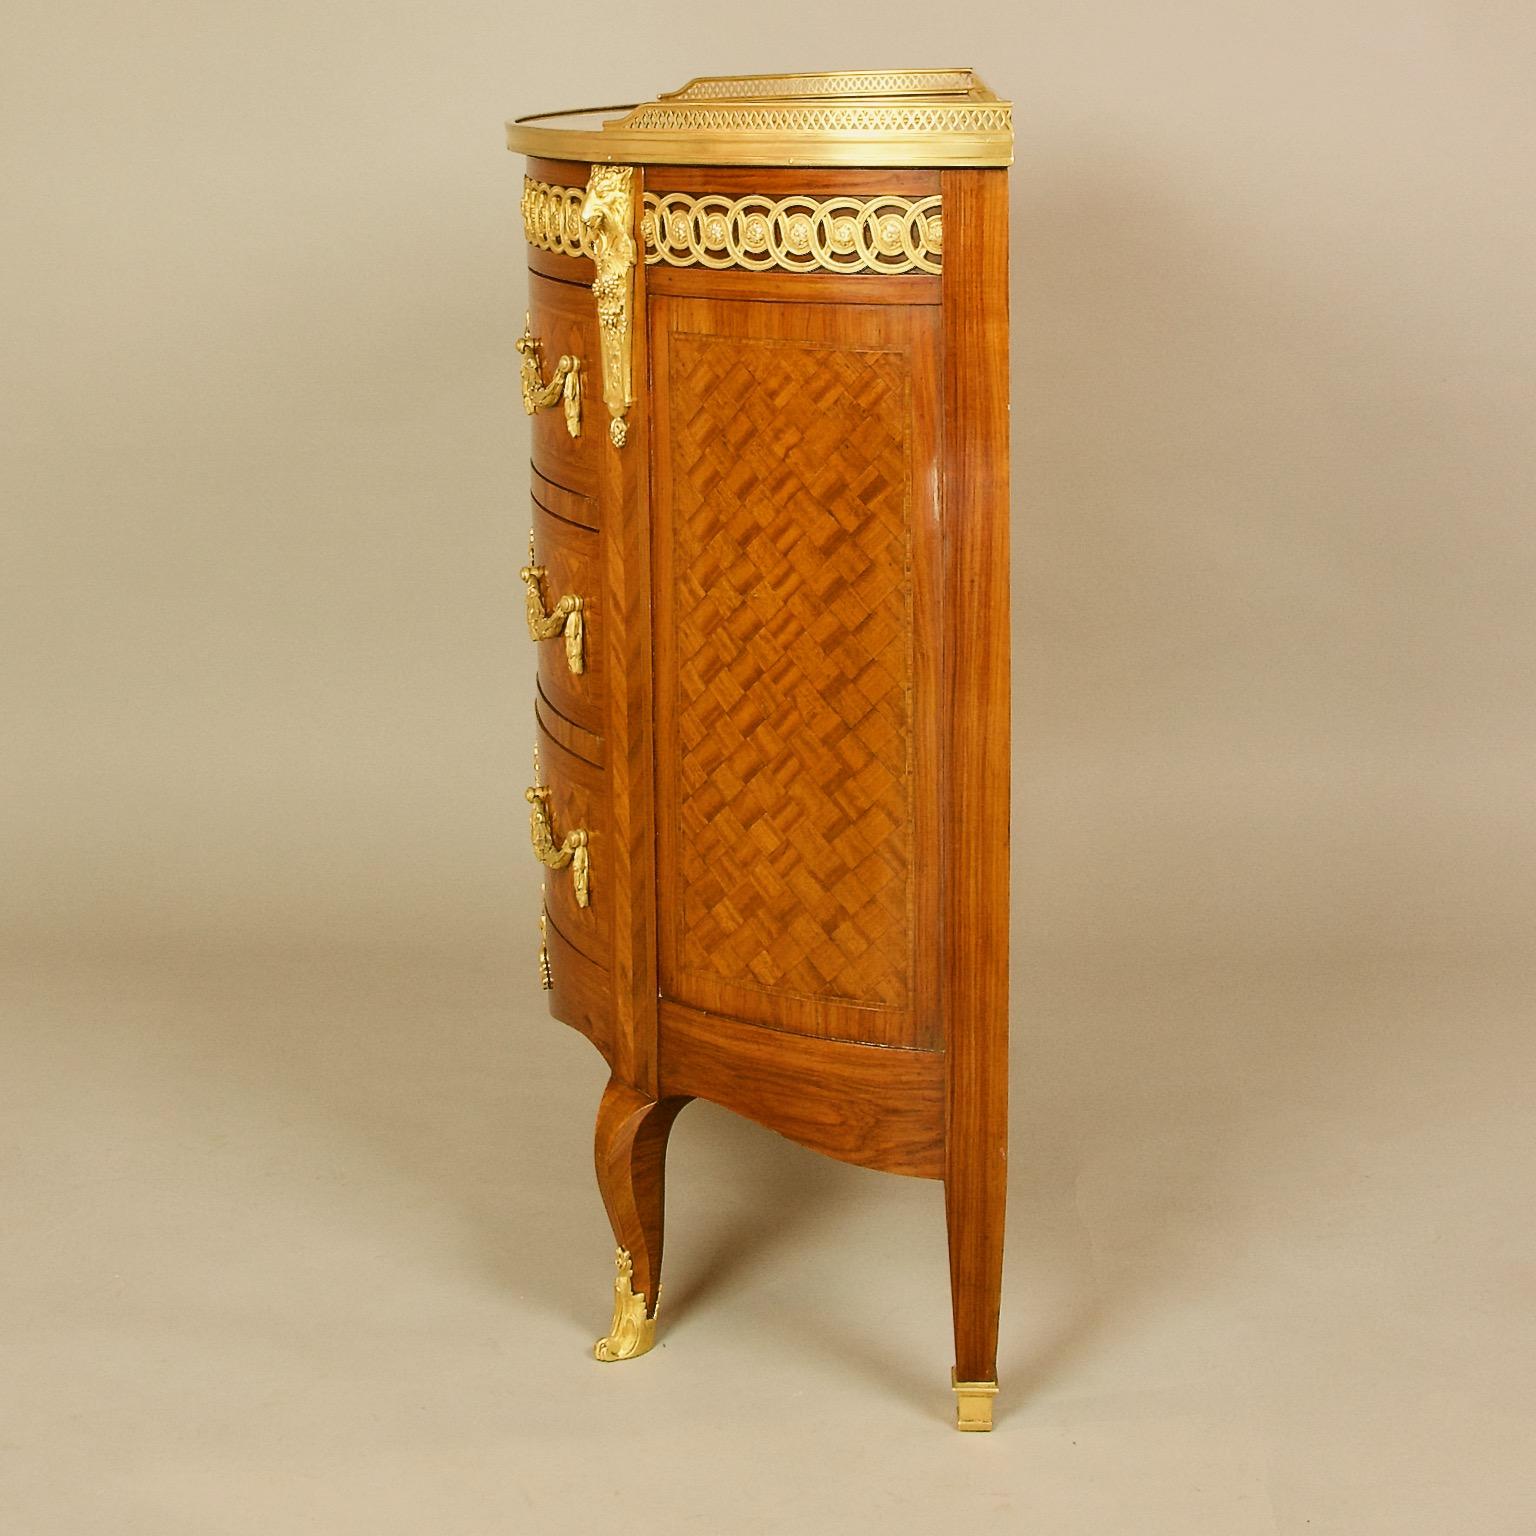 19th Century Louis XVI Marquetry and Gilt-Bronze Demilune Goat Heads Commode

An excellent 19th century Transitional /Louis XVI Style demilune or semi-elliptical commode or chest of drawers with fine cube-pattern marquetry: above a Neoclassical